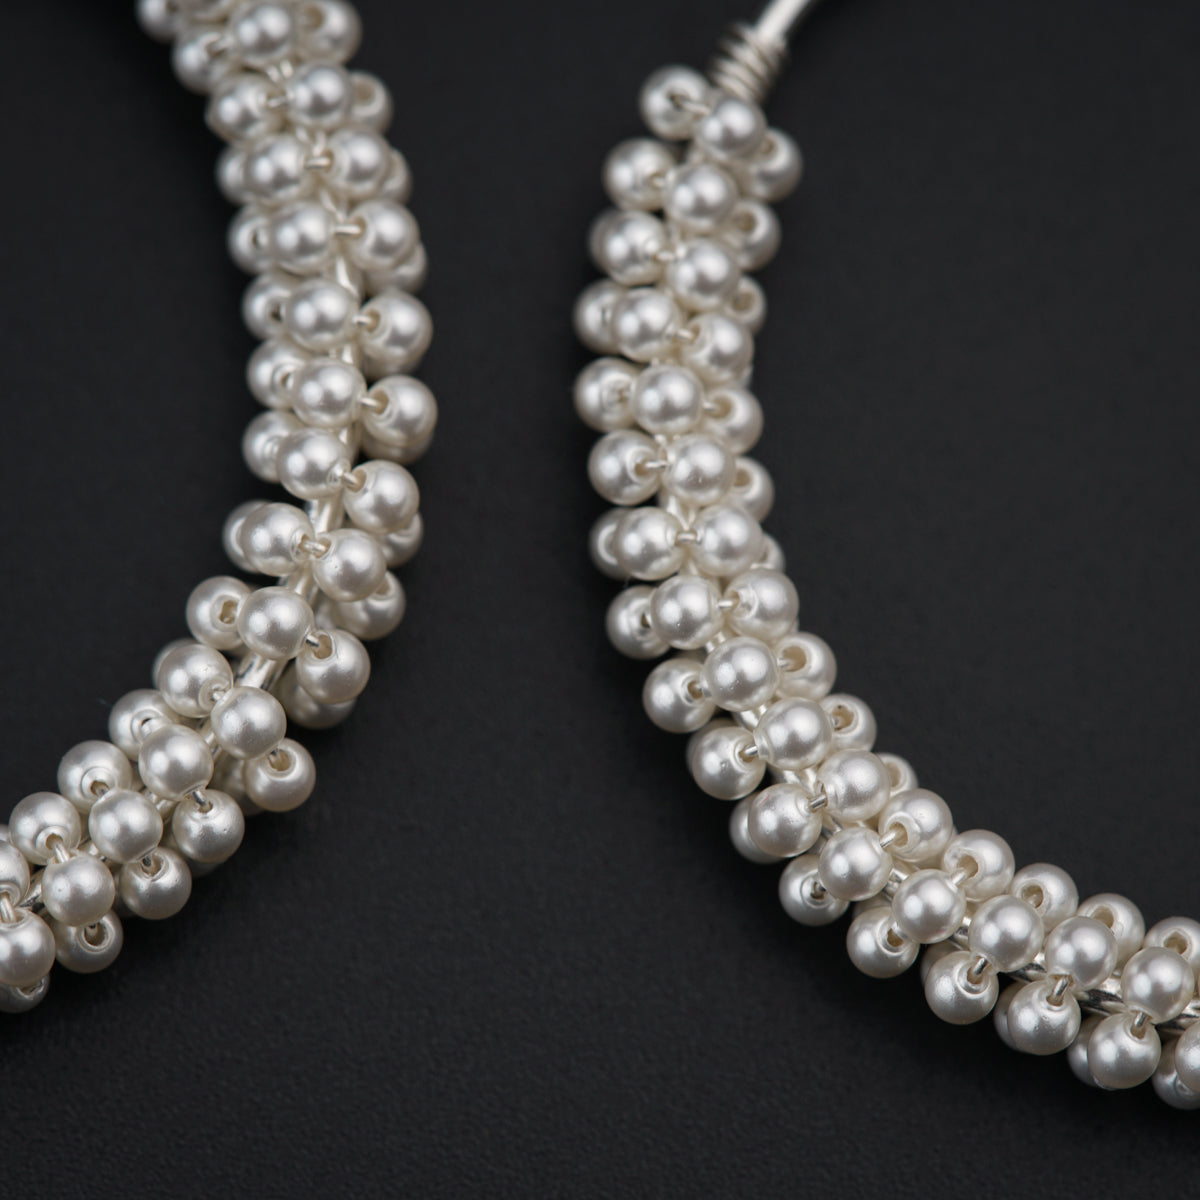 a close up of a pair of pearls